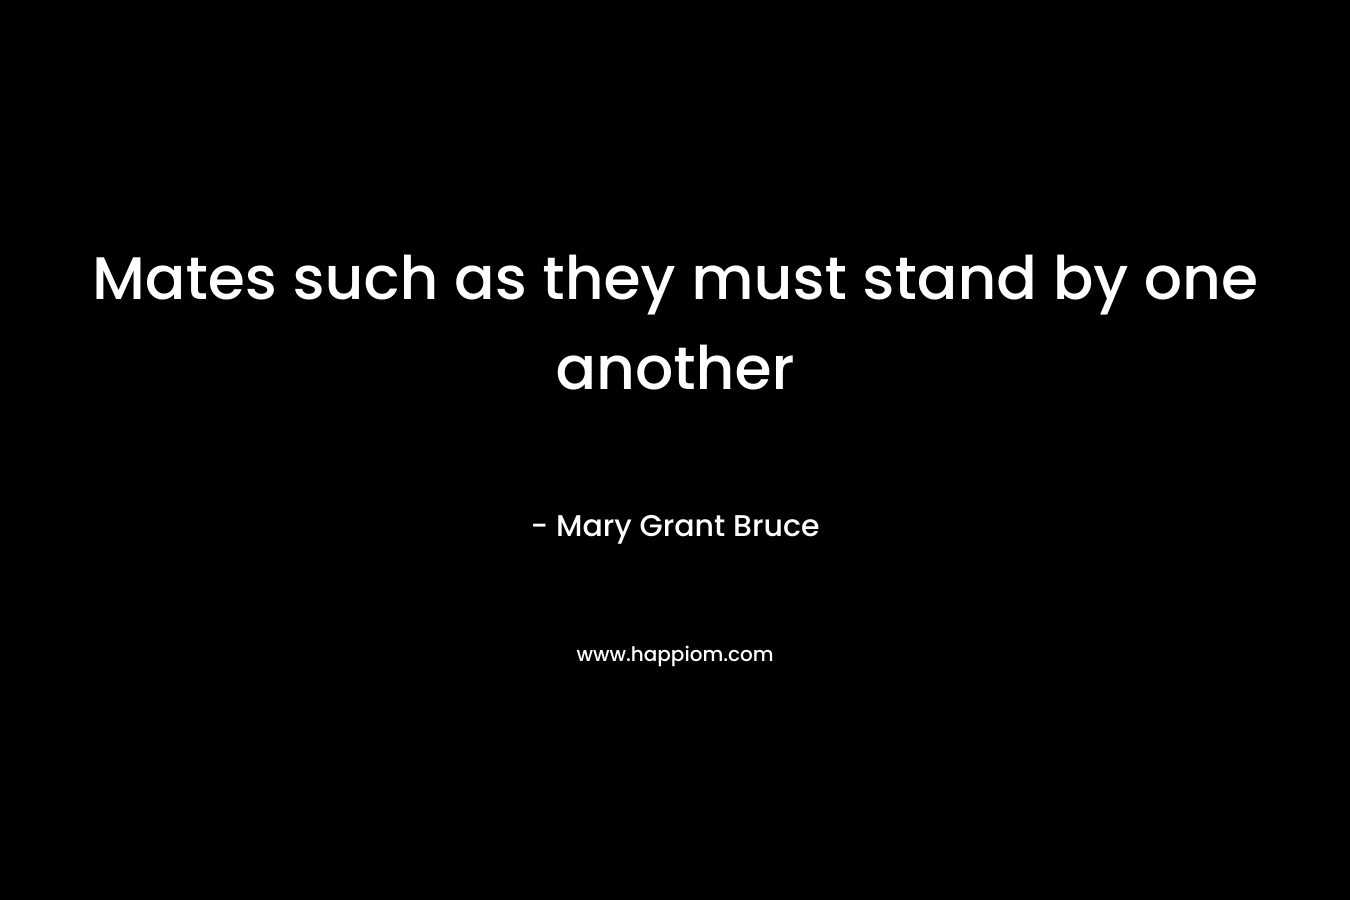 Mates such as they must stand by one another – Mary Grant Bruce